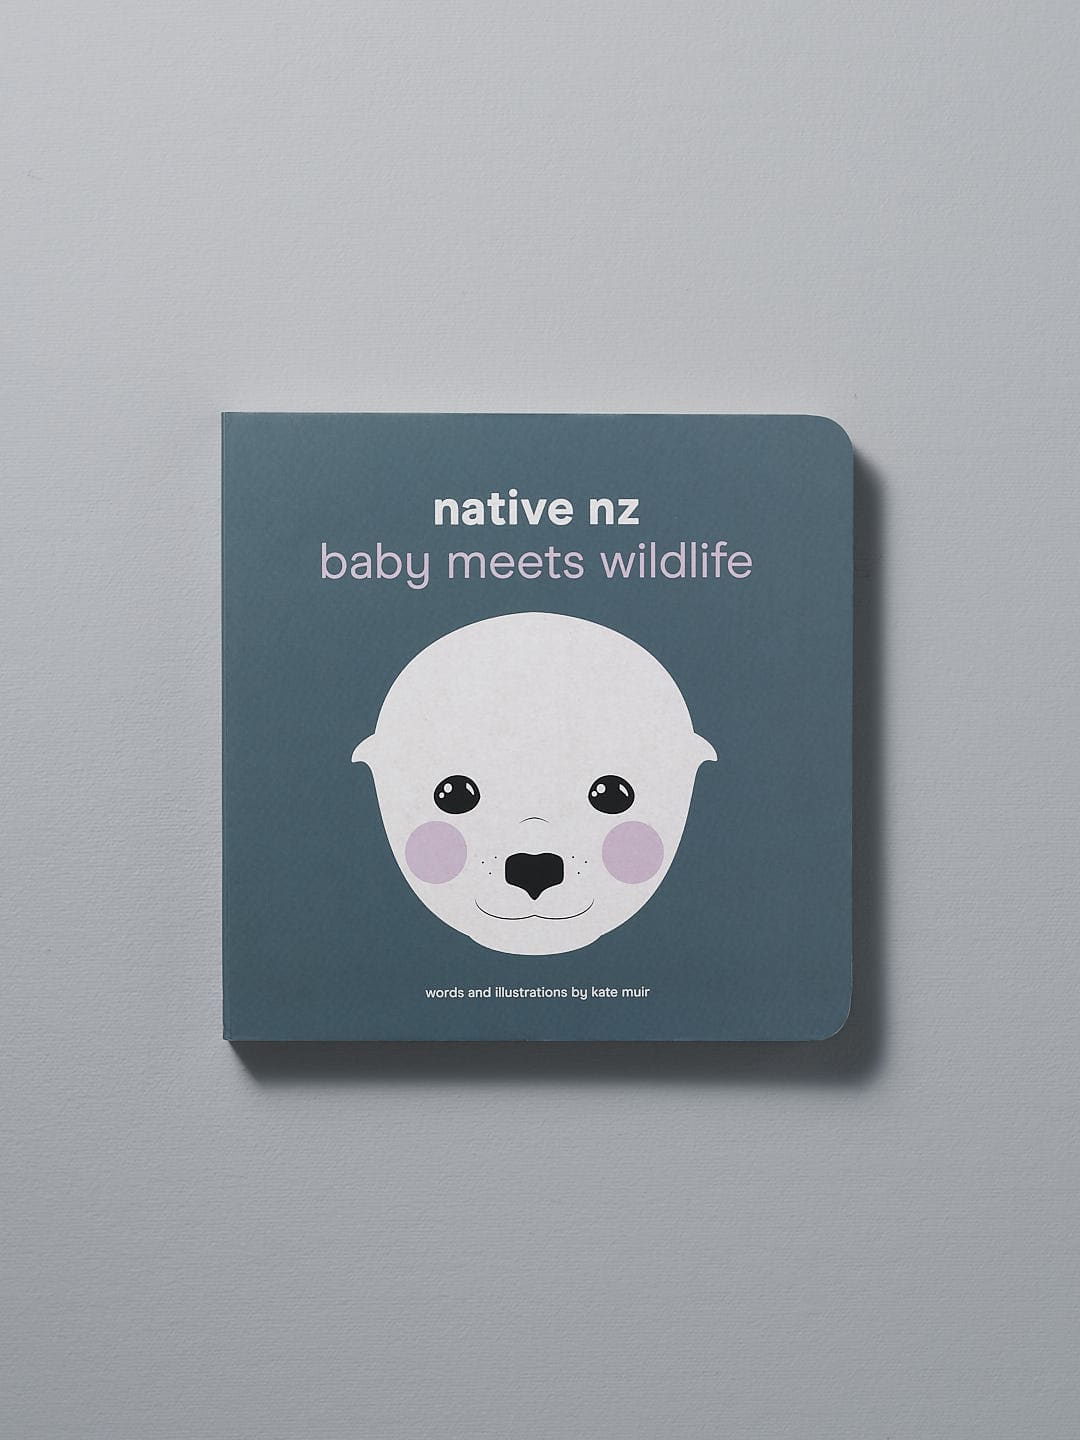 A board book titled "Native NZ Baby Meets Wildlife" by Kate Muir with an illustration of a stylized animal on the cover.